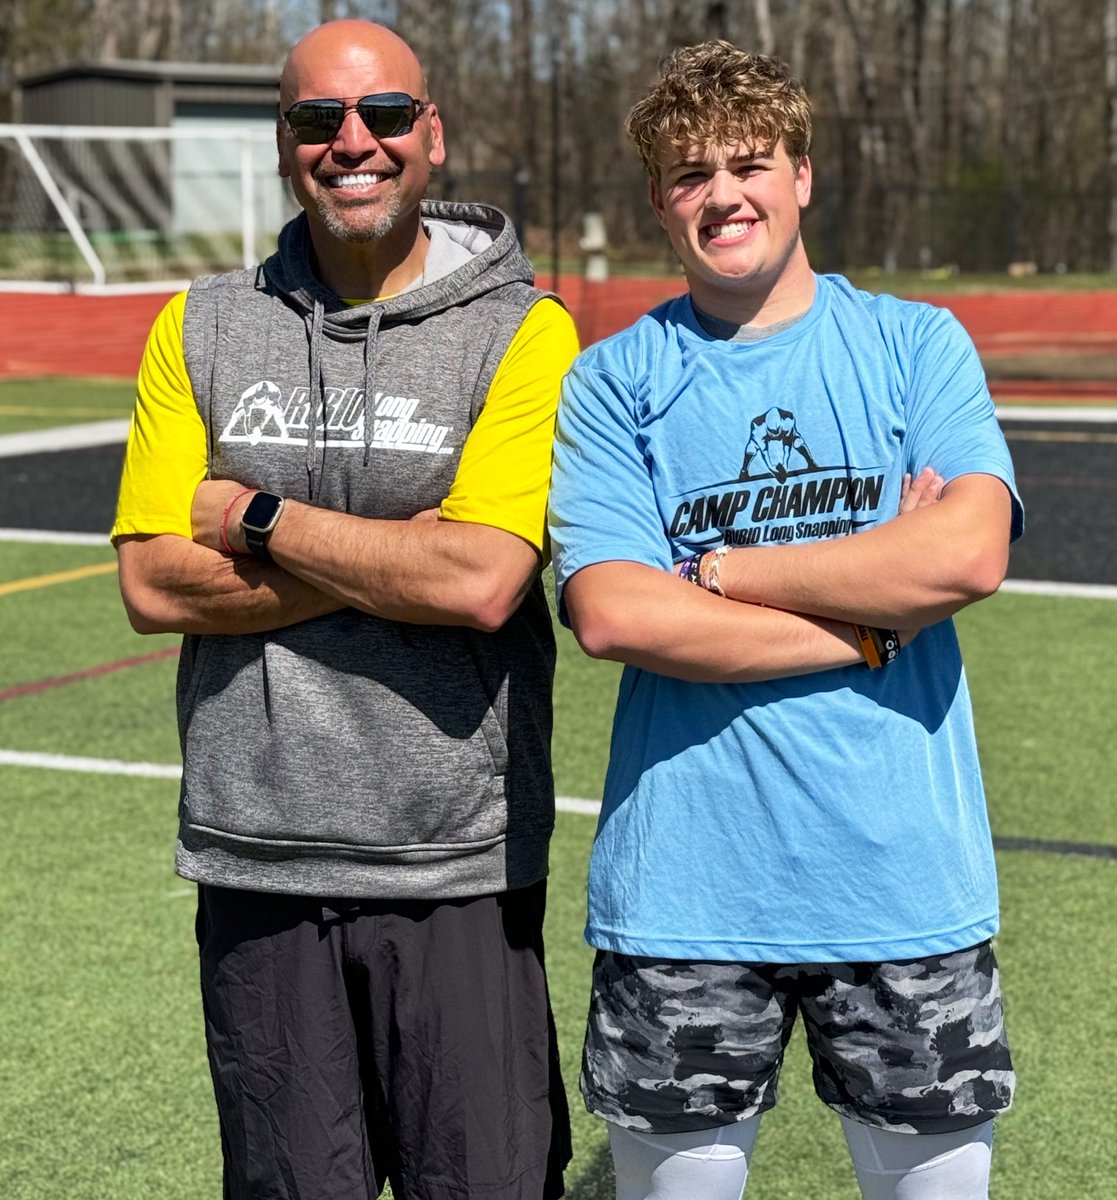 Rubio Long Snapping is proud to announce that Sam Aschbrenner (NC, 2025) is the overall champion at the NC spring camp! Next stops for Rubio Long Snapping: March 17 in Atlanta April 7 in Nashville April 14 in Chicago April 21 in New Jersey April 21 in San Francisco April